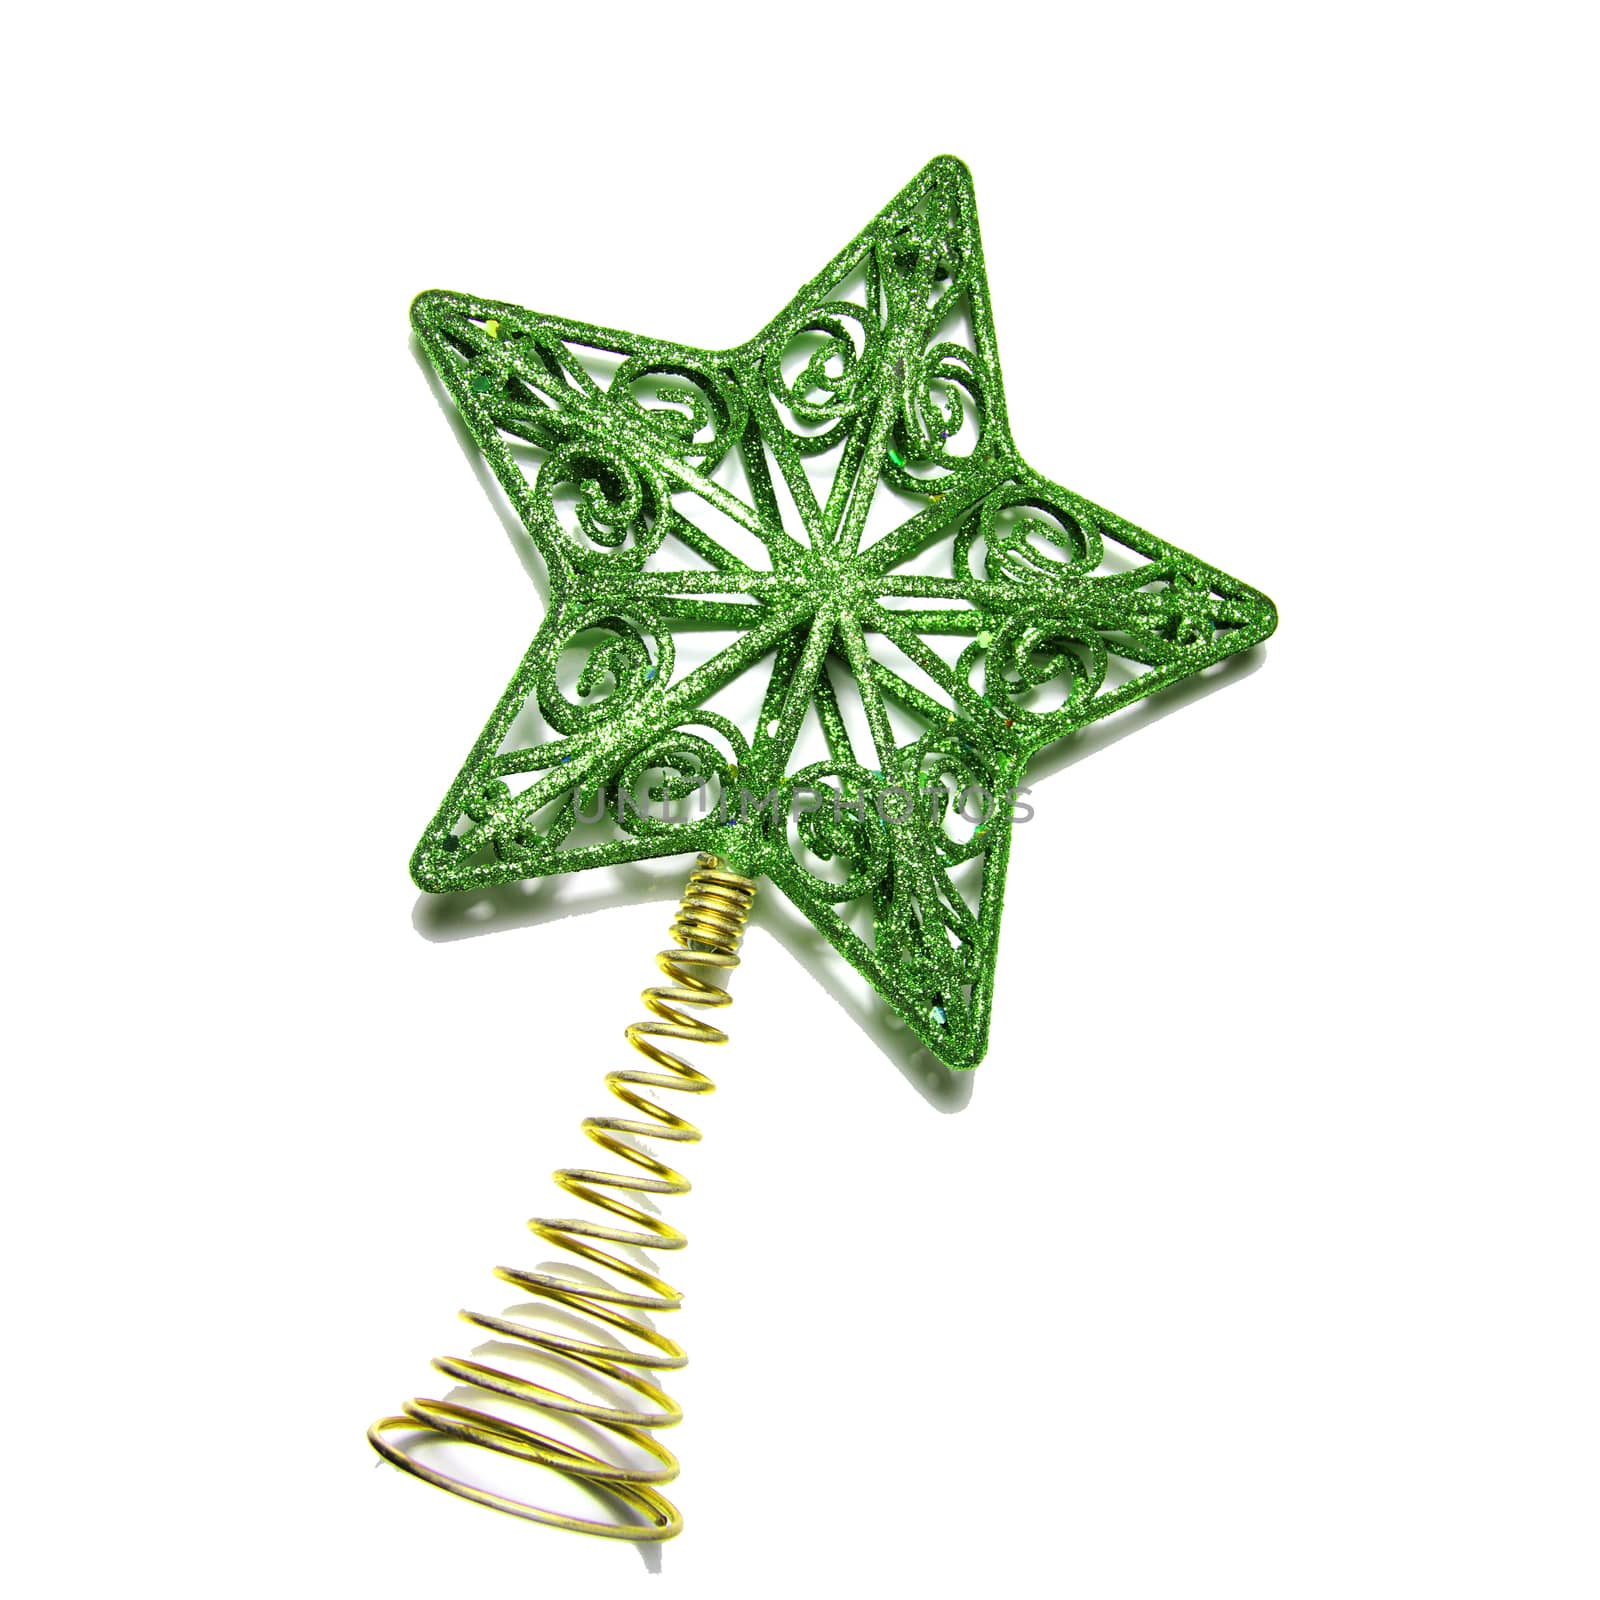 Christmas background with glass ornament in star shape